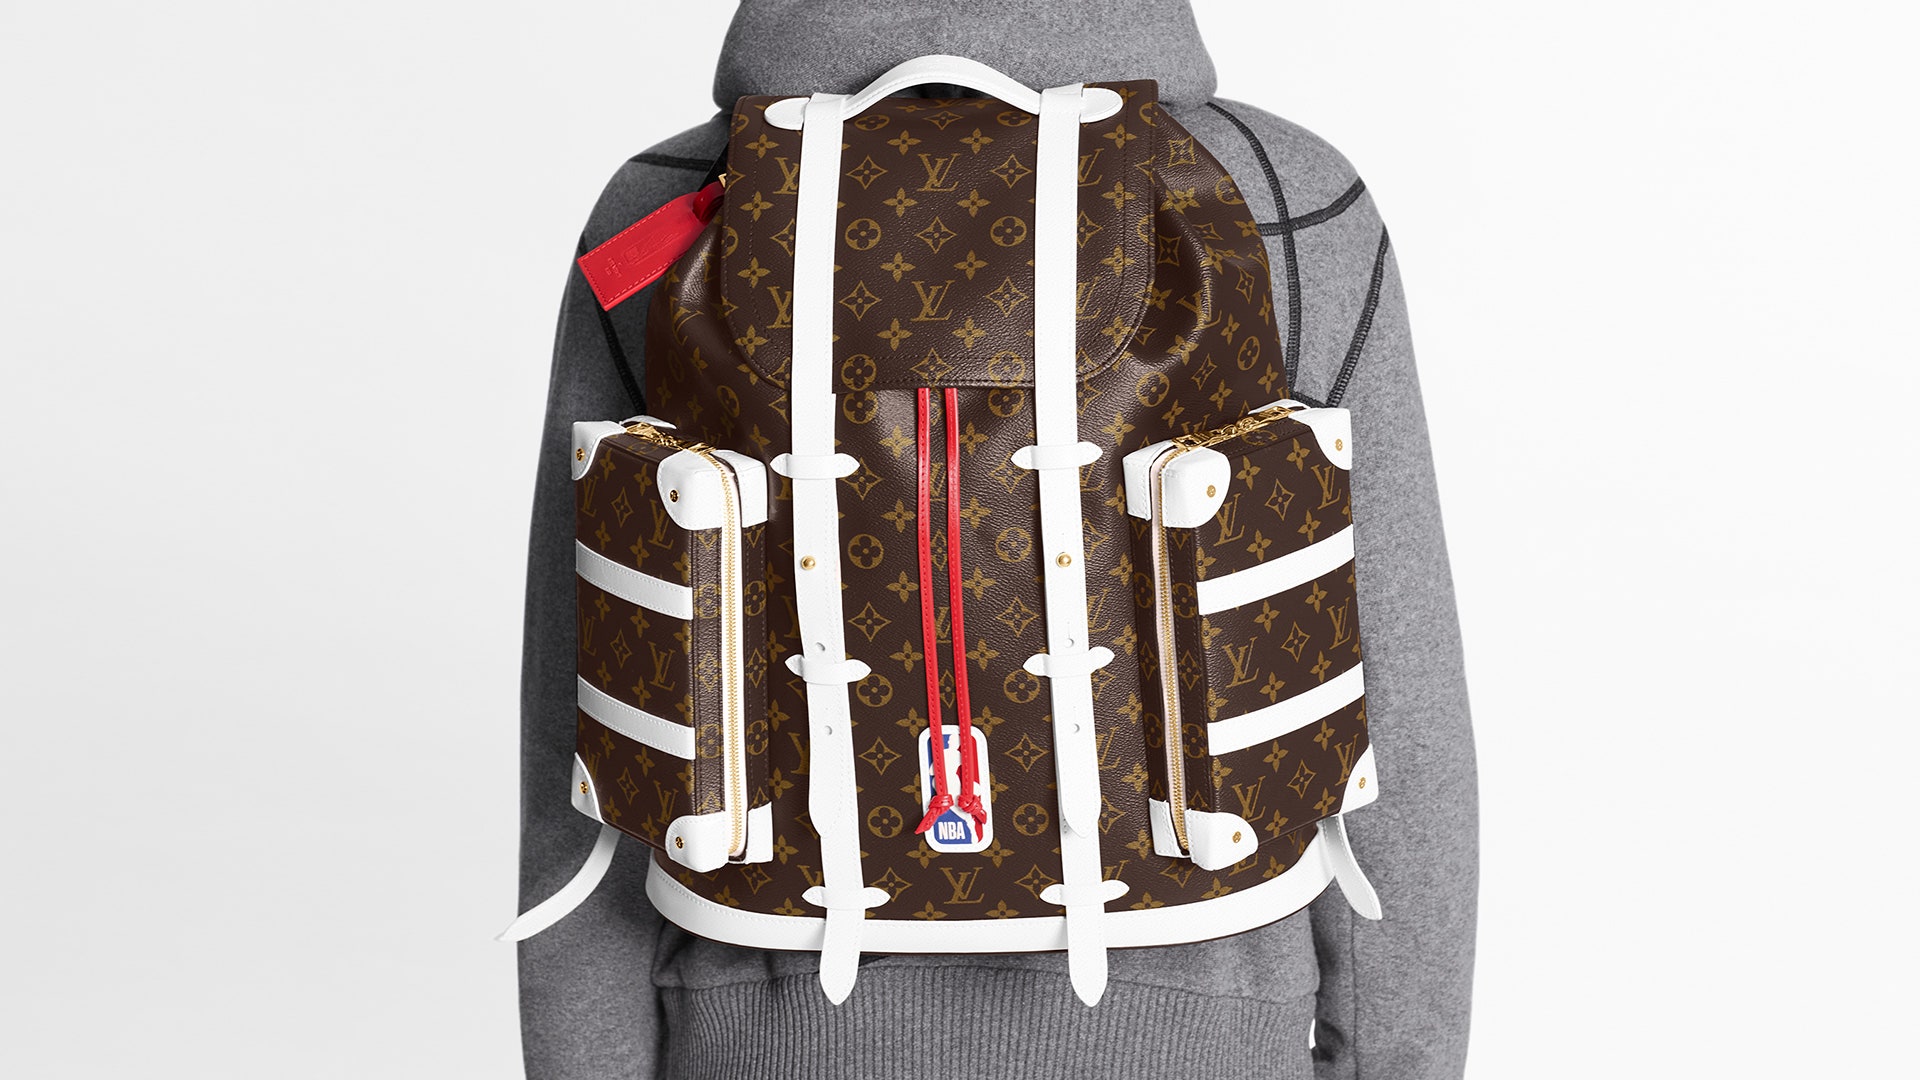 Channel LeBron James with the Louis Vuitton x NBA collection - 0